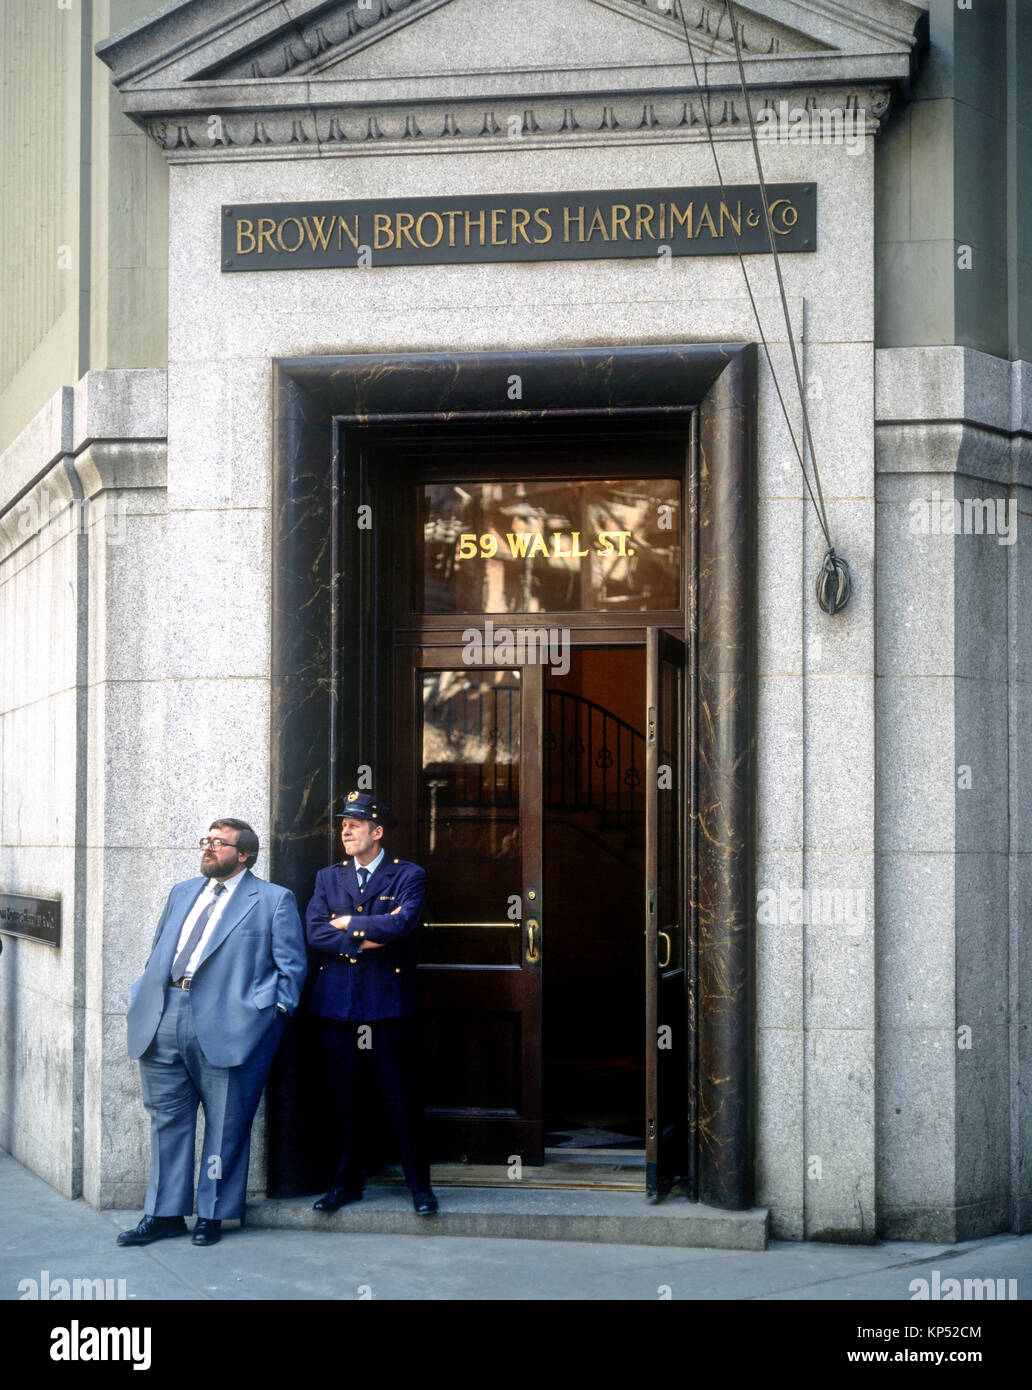 May 1982,New York,warden,trader,Brown Brothers Harriman,financial services,59 Wall street,lower Manhattan,New york City,NY,NYC,USA, Stock Photo